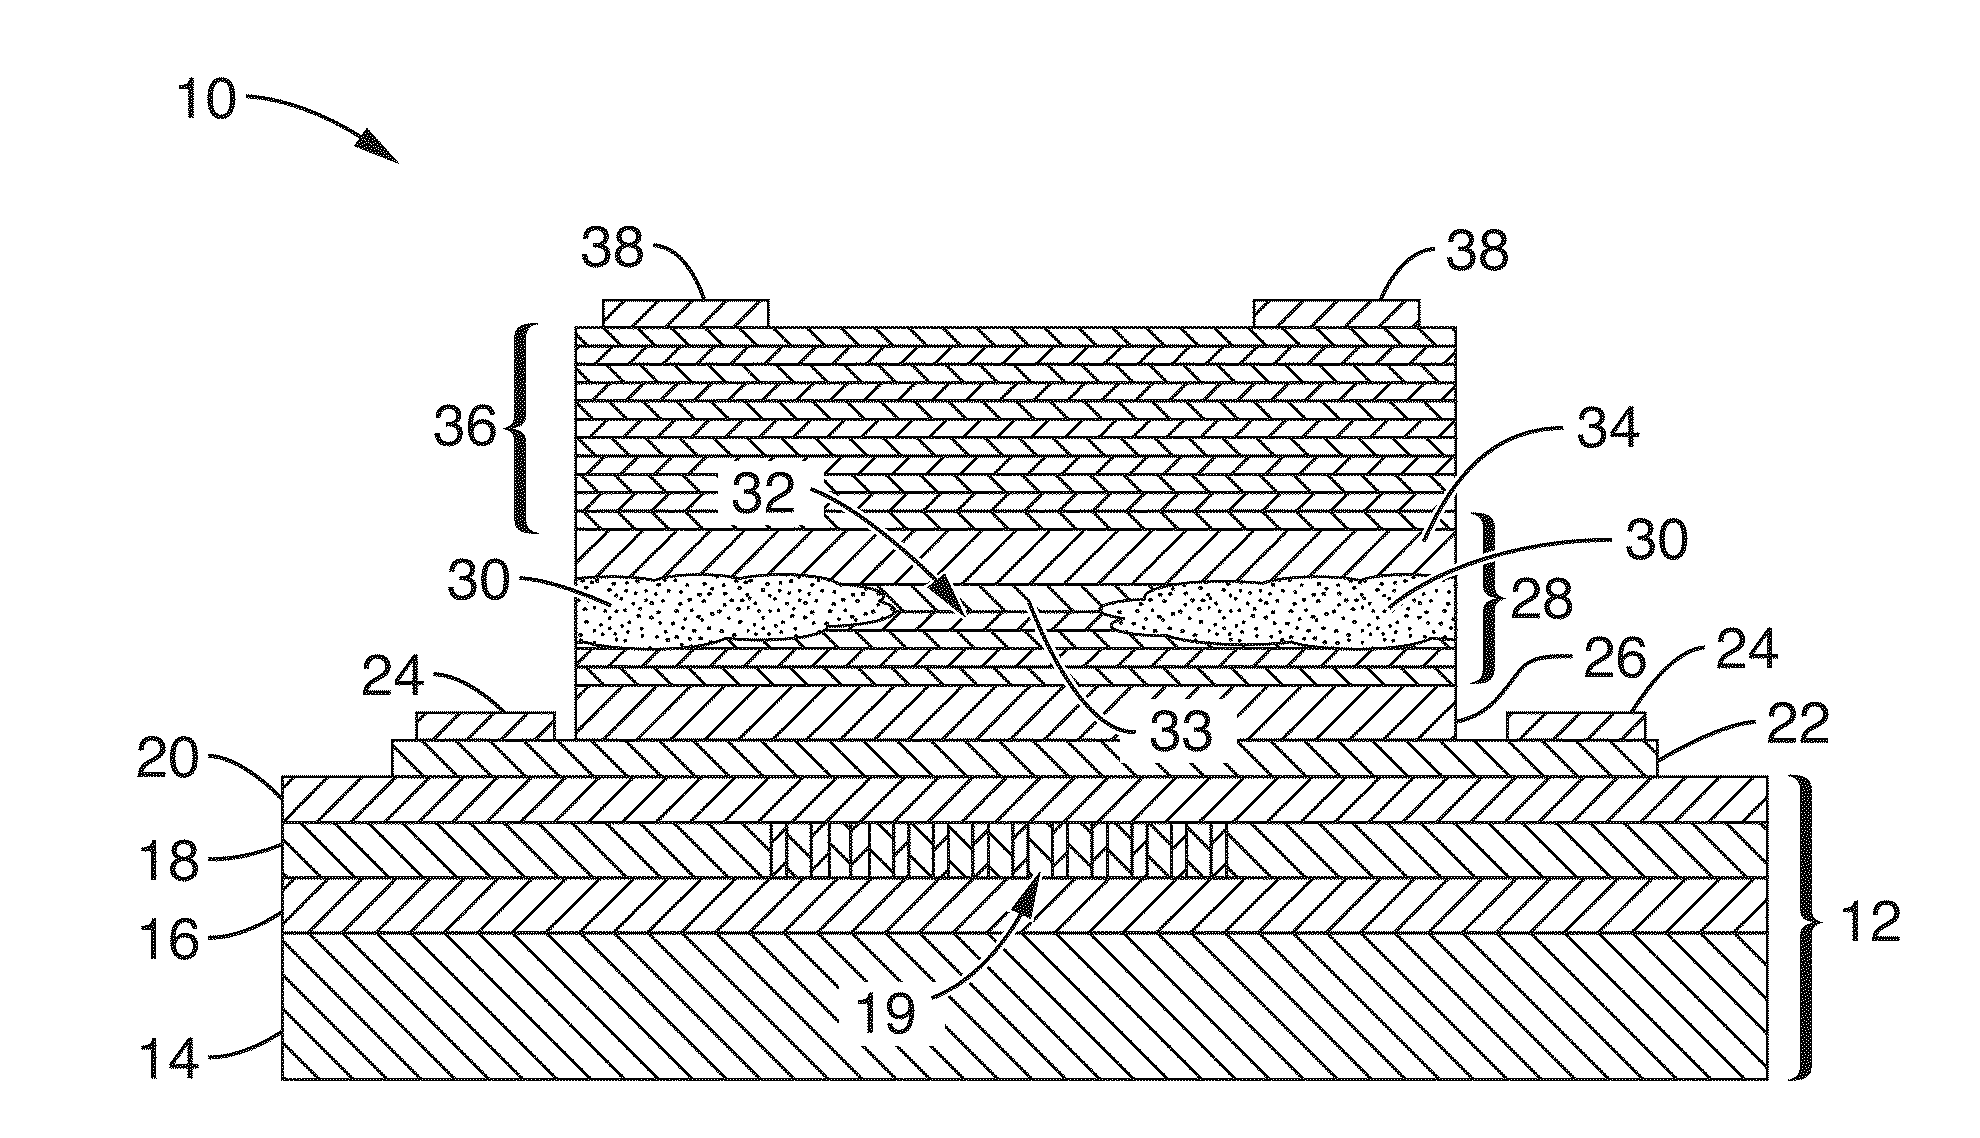 Vertical cavity surface emitting lasers with silicon-on-insulator high contrast grating